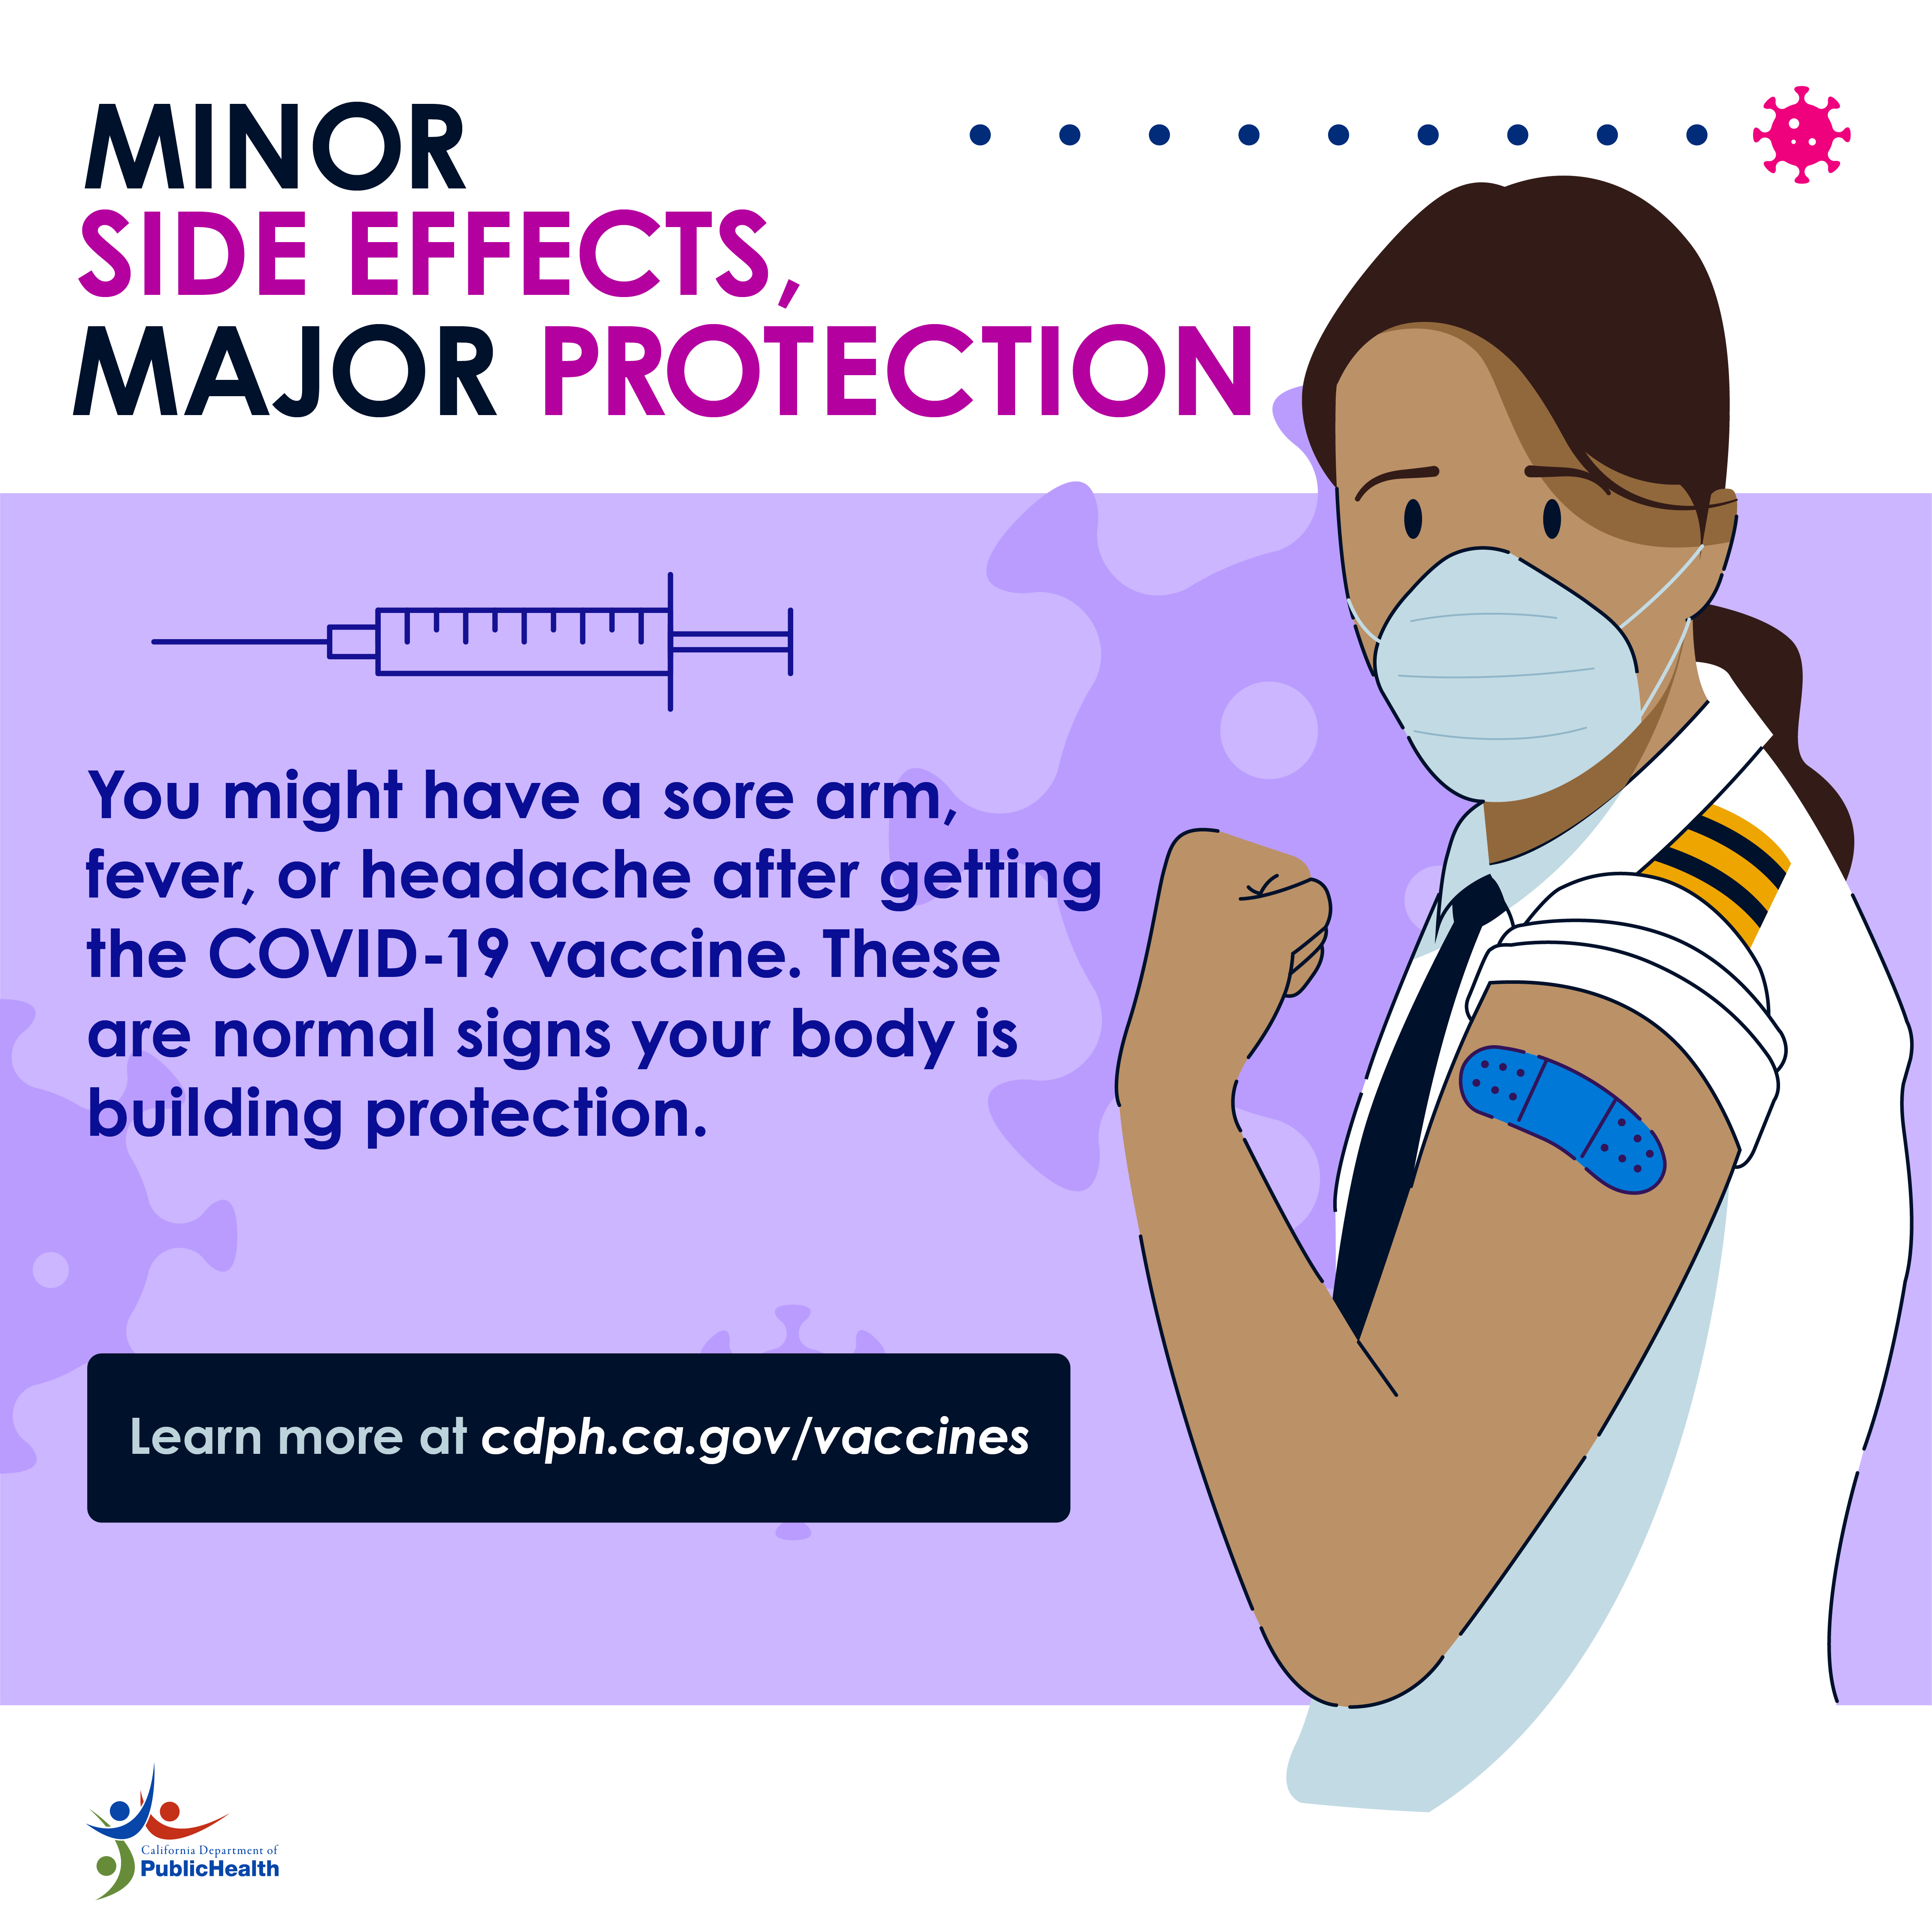 Woman in facemask holding arm with bandaid, vaccine syringe nearby. Text: Minor side effects, major protection. 